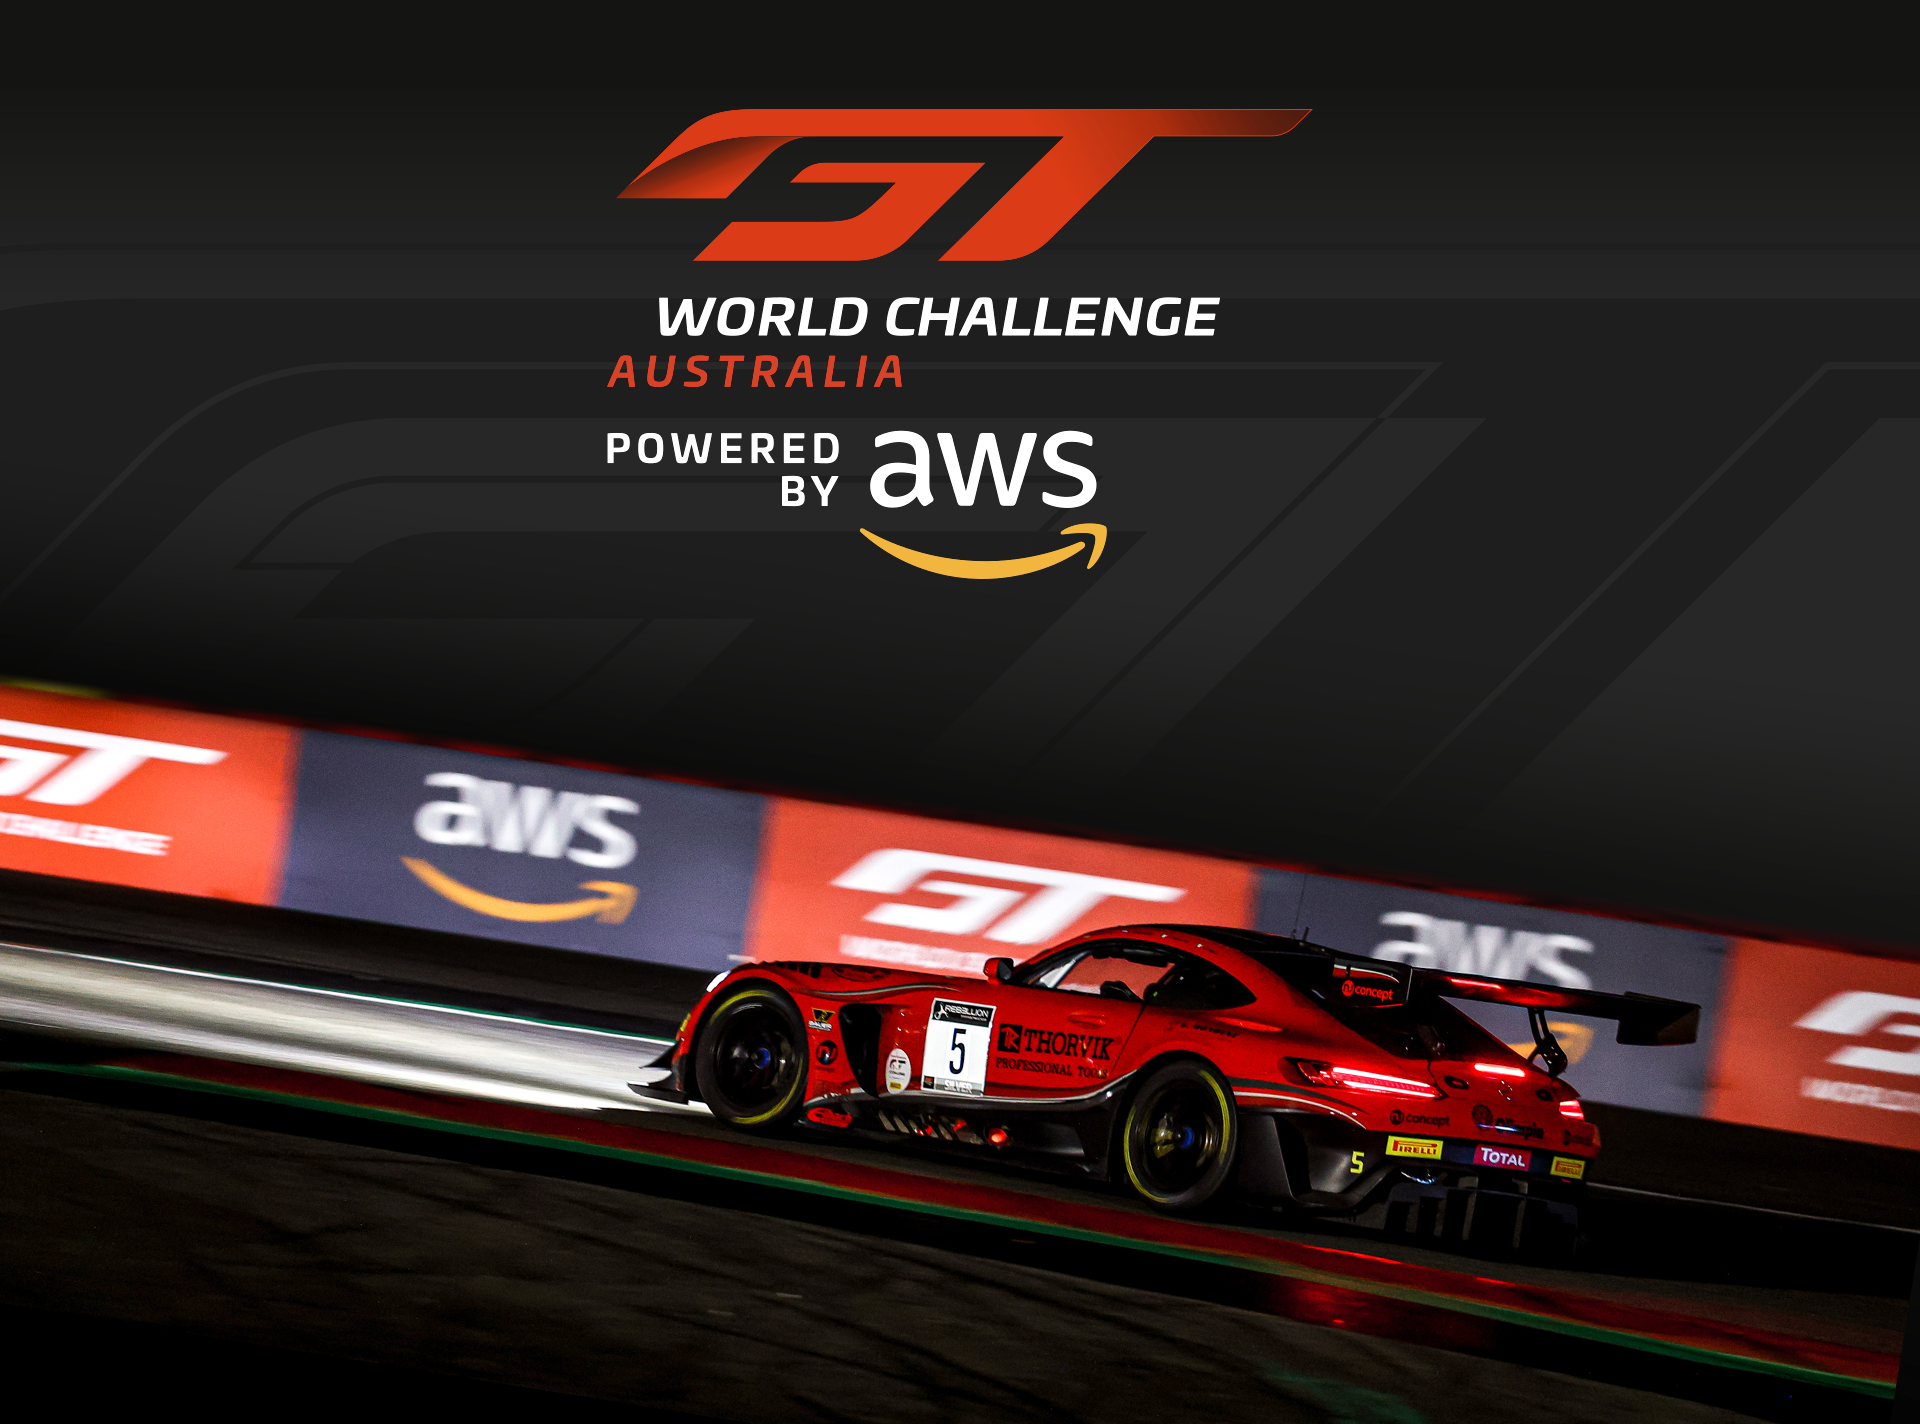 SRO and ARG confirm key details for newlook GT World Challenge